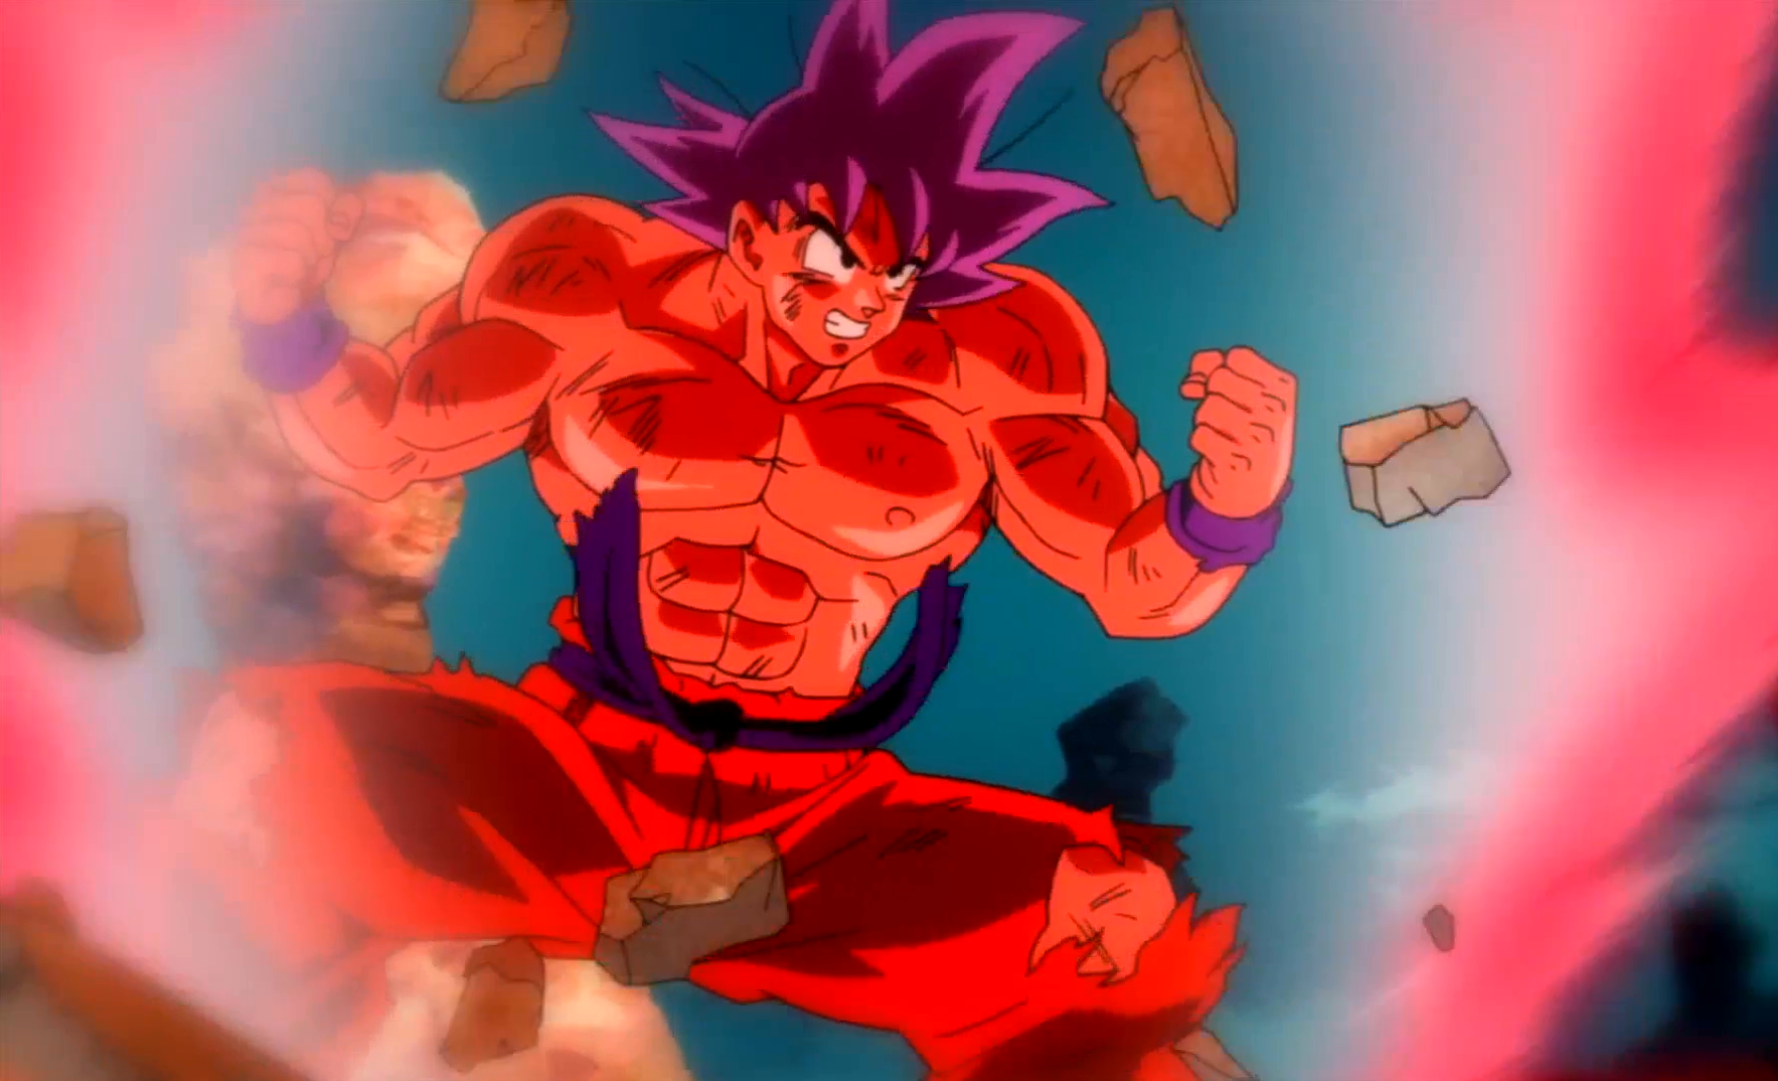 DBZ Fusion Generator on X: LIMITED PUBLIC KAIOKEN - Early Access Release!  Enter the code: kaiokenXGet to unlock Kaioken! The secret early access code  will expire on 8/25. (expect more codes soon!)